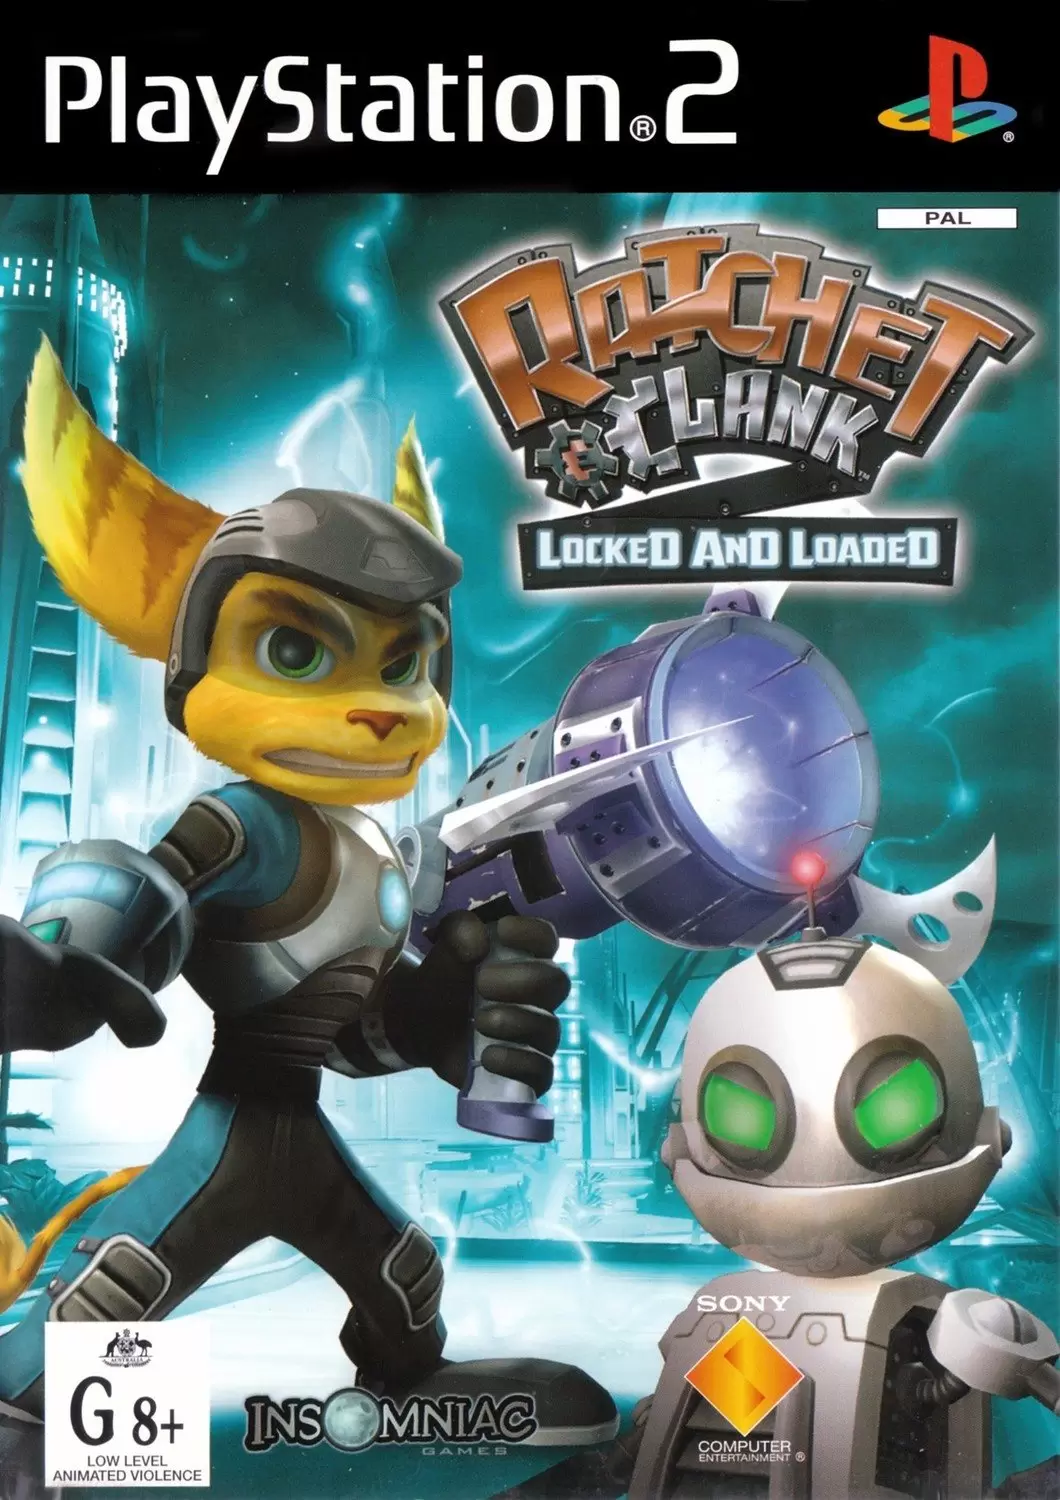 PS2 Games - Ratchet & Clank: Locked and Loaded